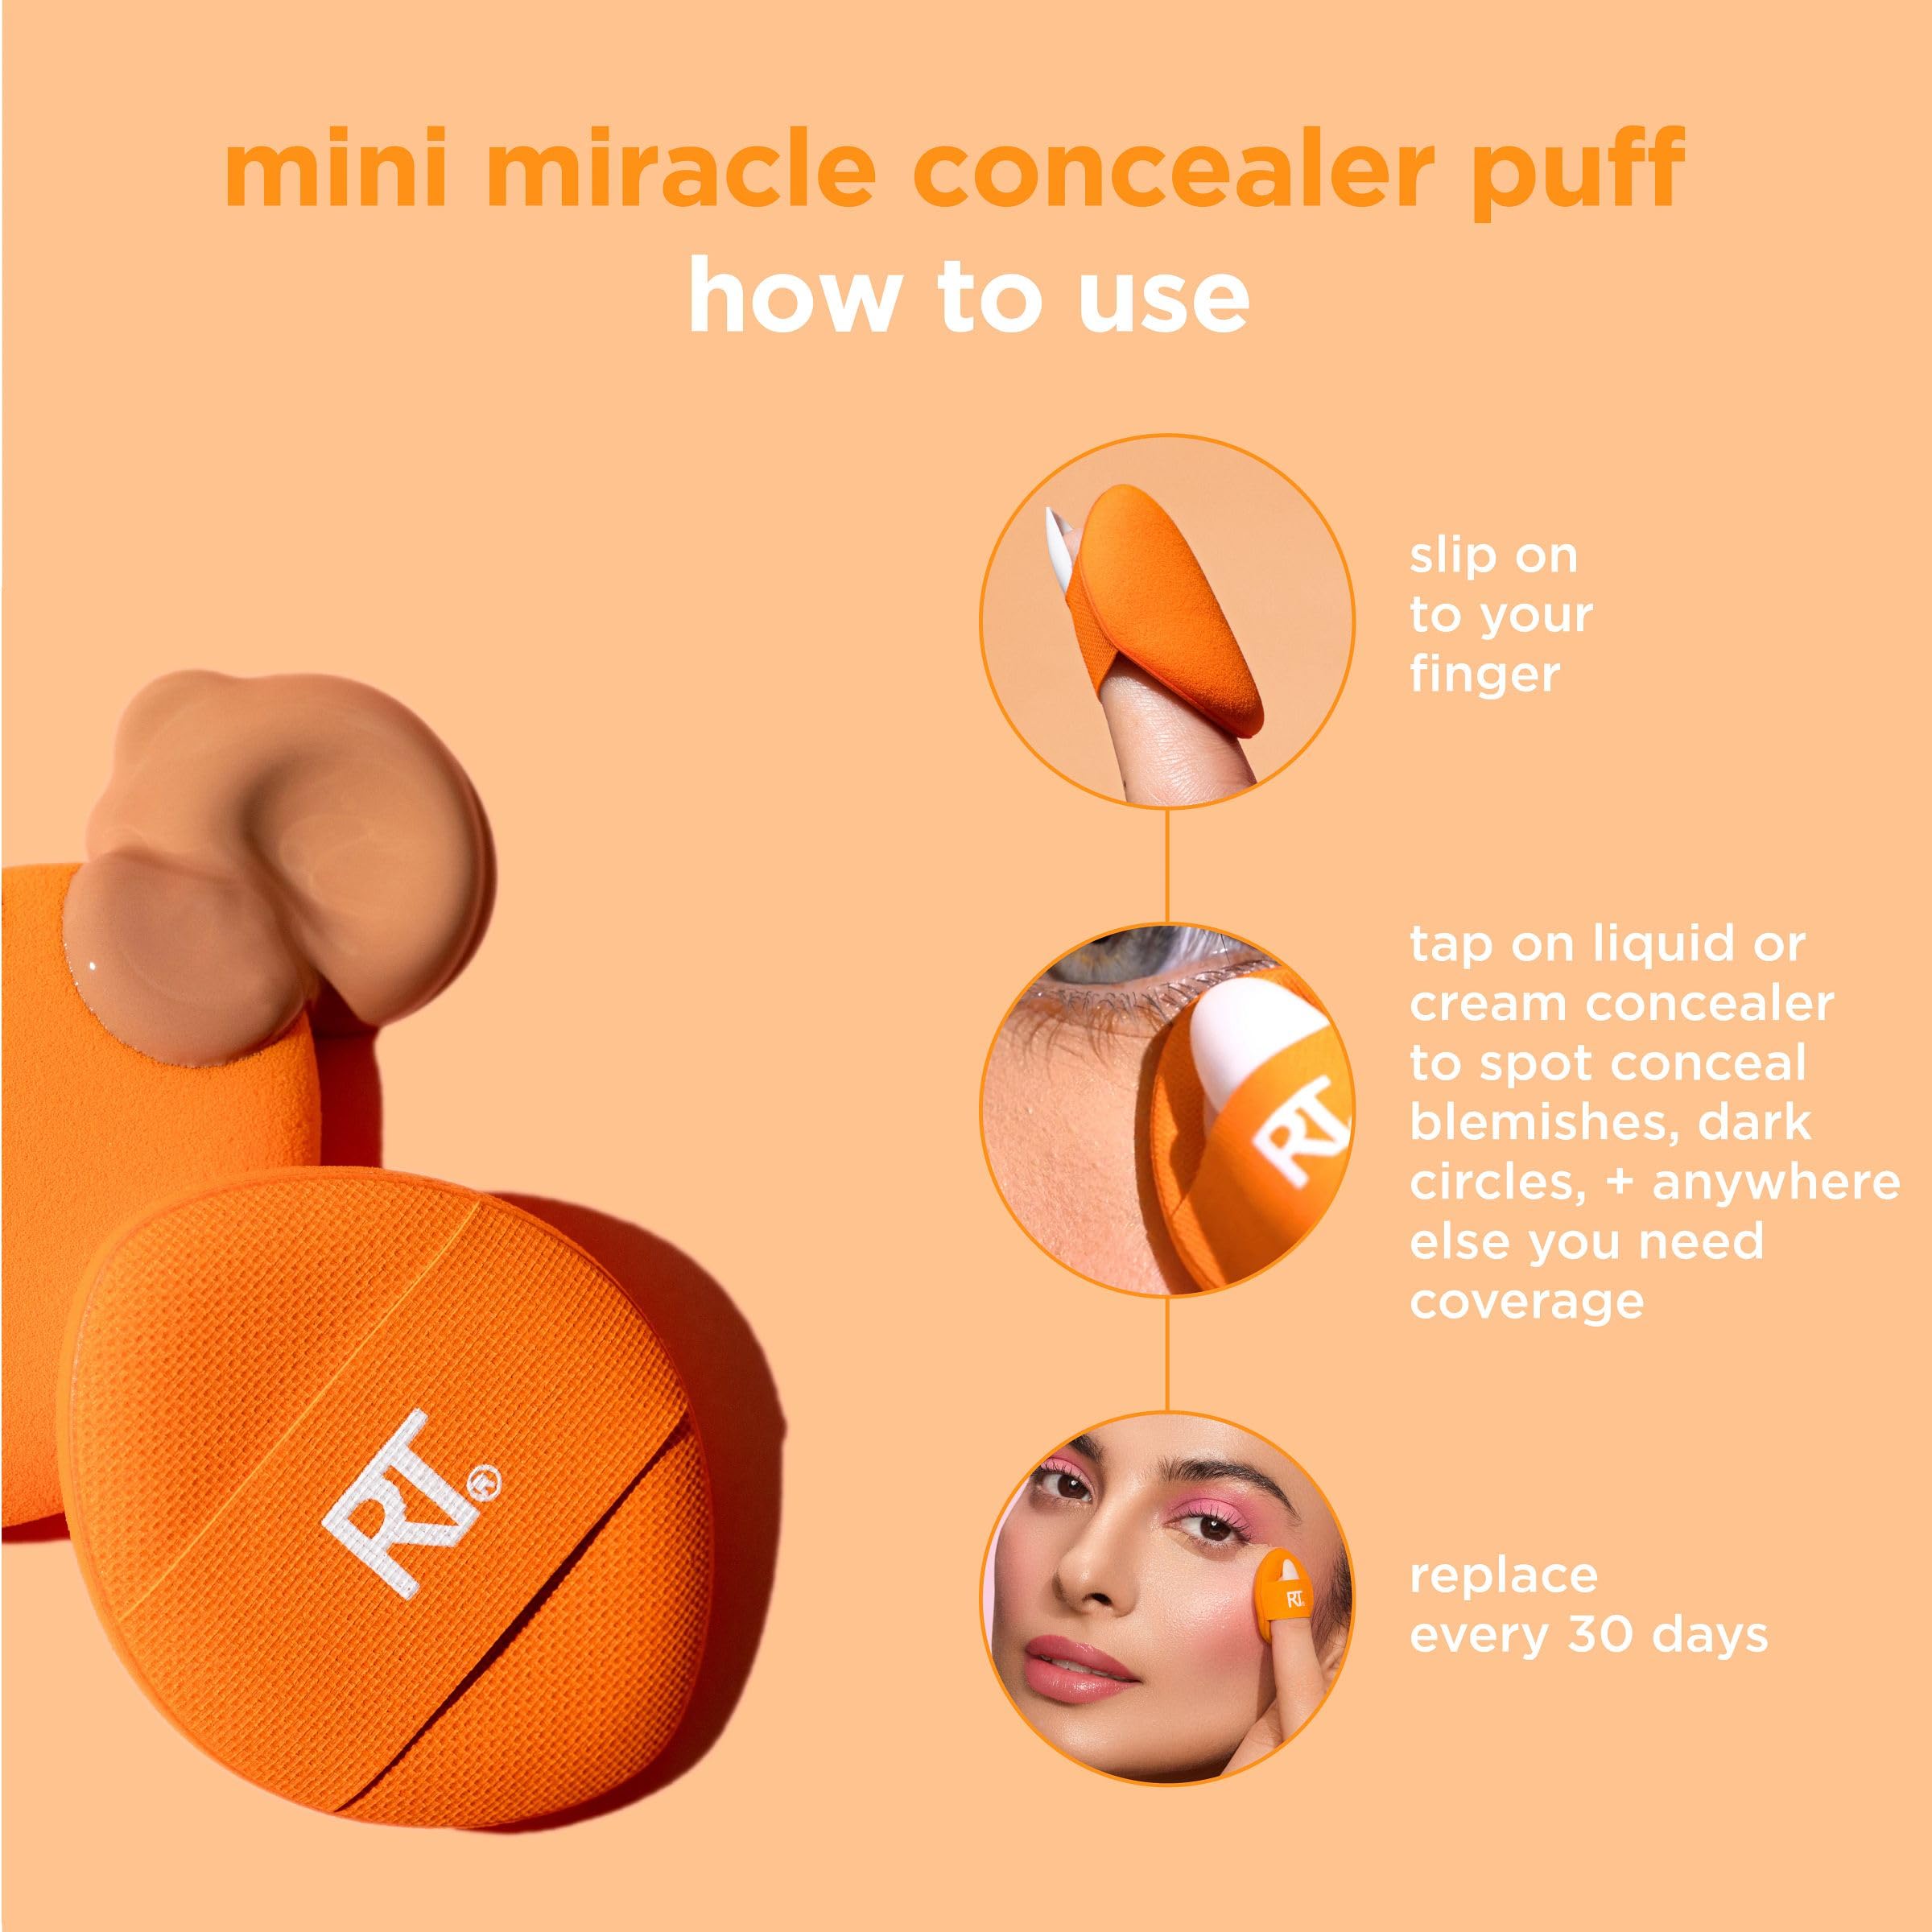 Real Techniques Mini Miracle Concealer Puff Trio, Small Makeup Puff For Liquid & Cream Foundation & Concealer, Targeted Concealing, Travel Friendly & Reusable, Vegan & Cruelty Free, 3 Count